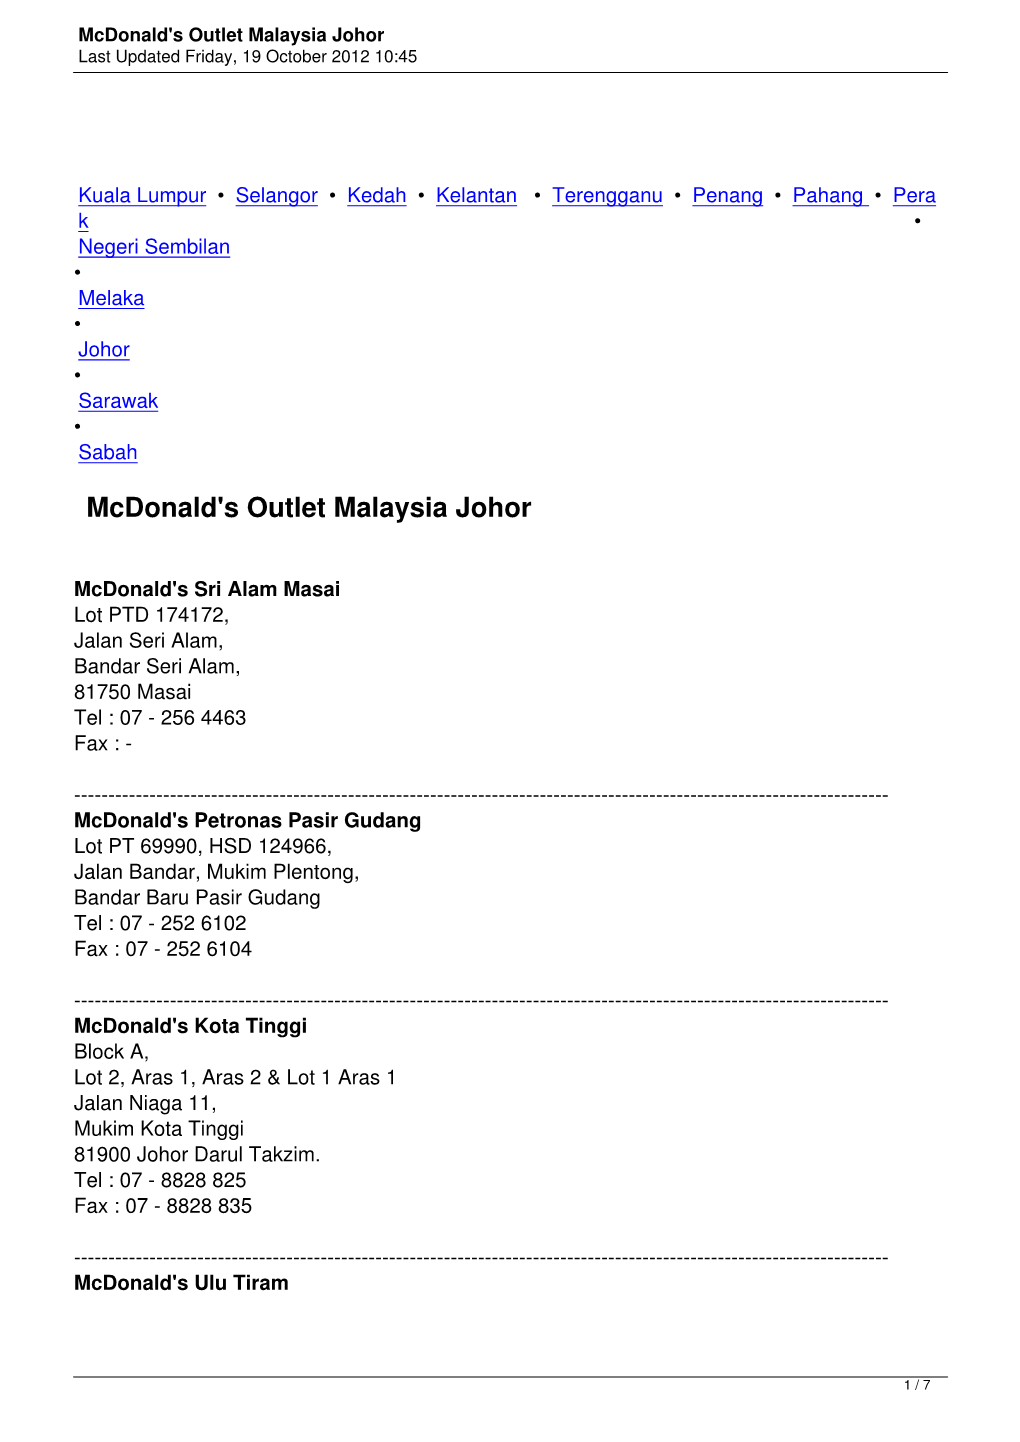 Mcdonald's Outlet Malaysia Johor Last Updated Friday, 19 October 2012 10:45